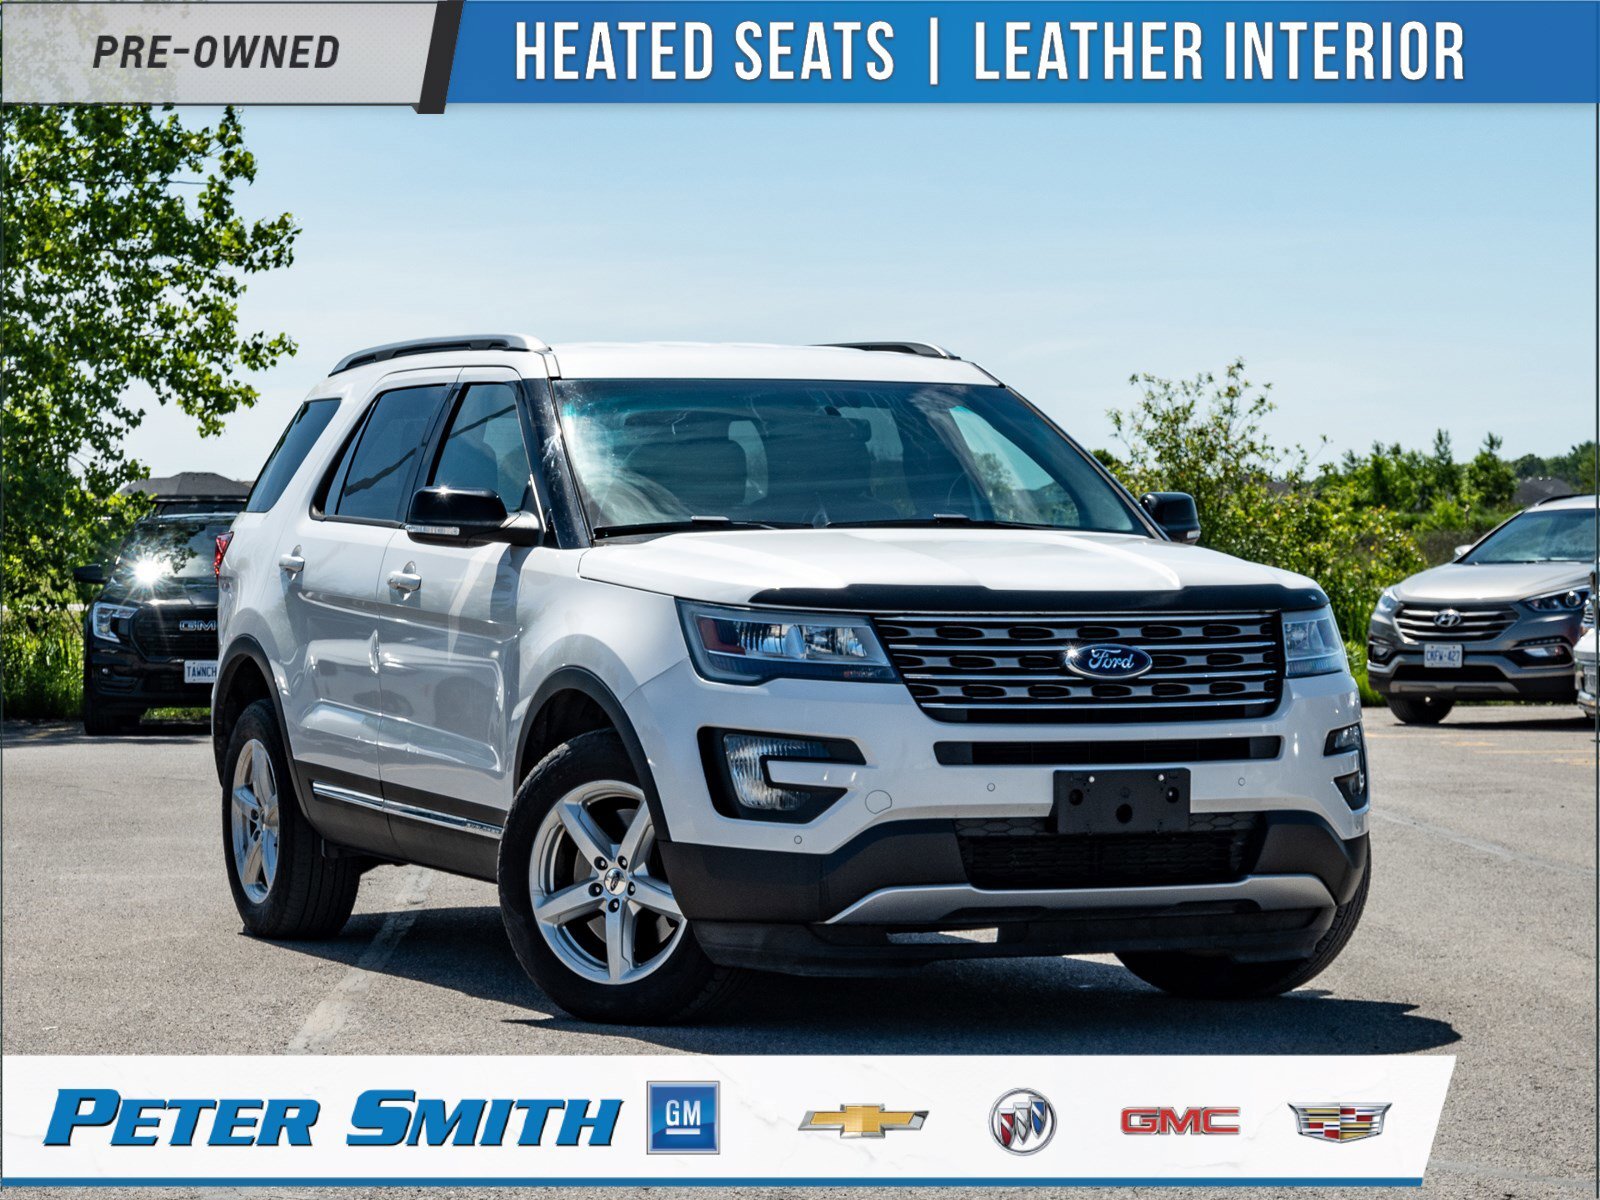 2016 Ford Explorer XLT - Heated Front Seats | 3rd Row Seating